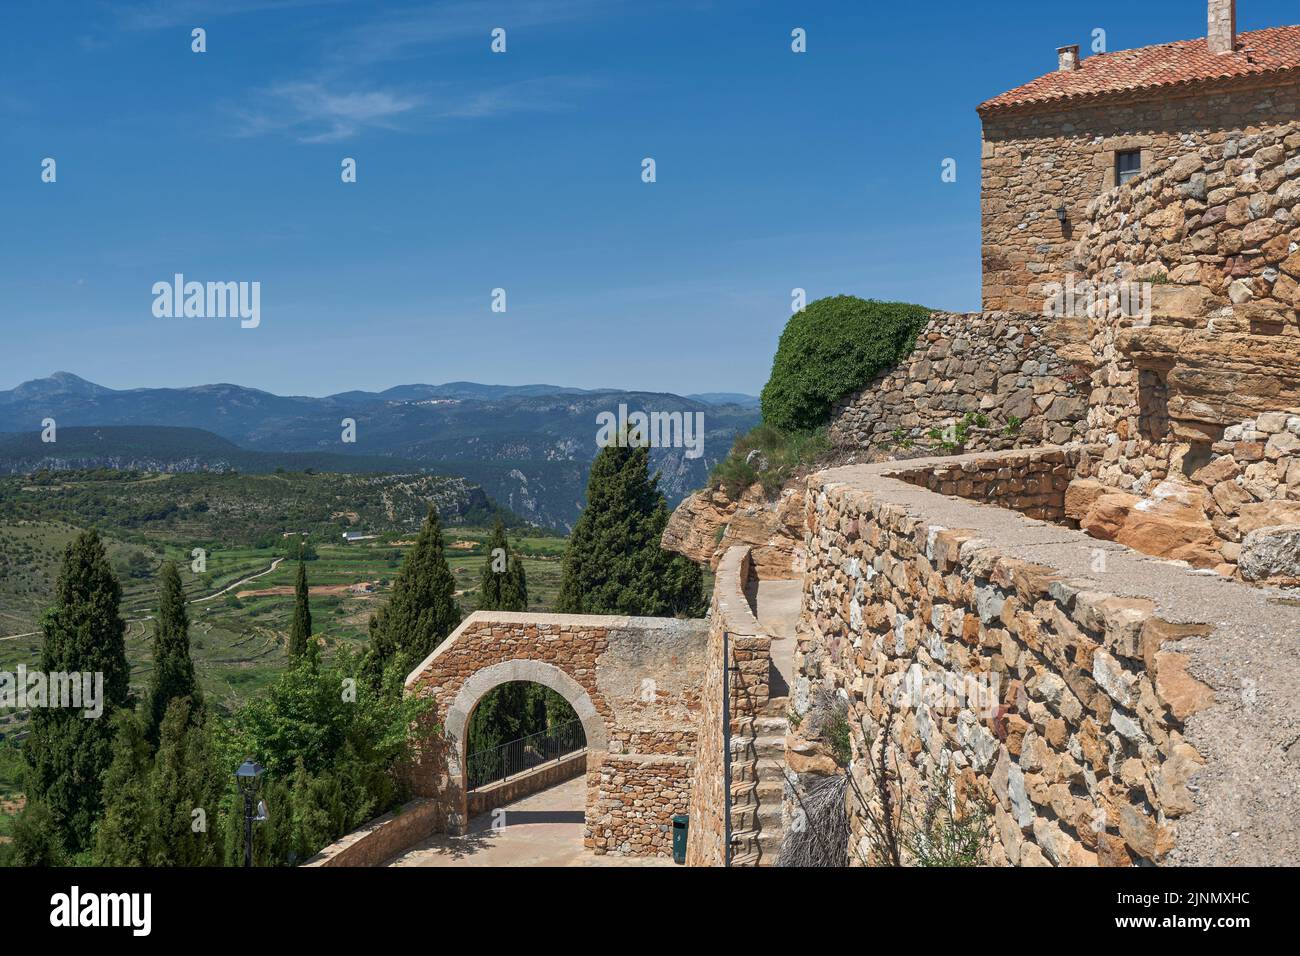 General panoramic view of Culla and the hermitage of San Cristobal de Benasal in the background. Most beautiful town in Spain, Castellon Stock Photo